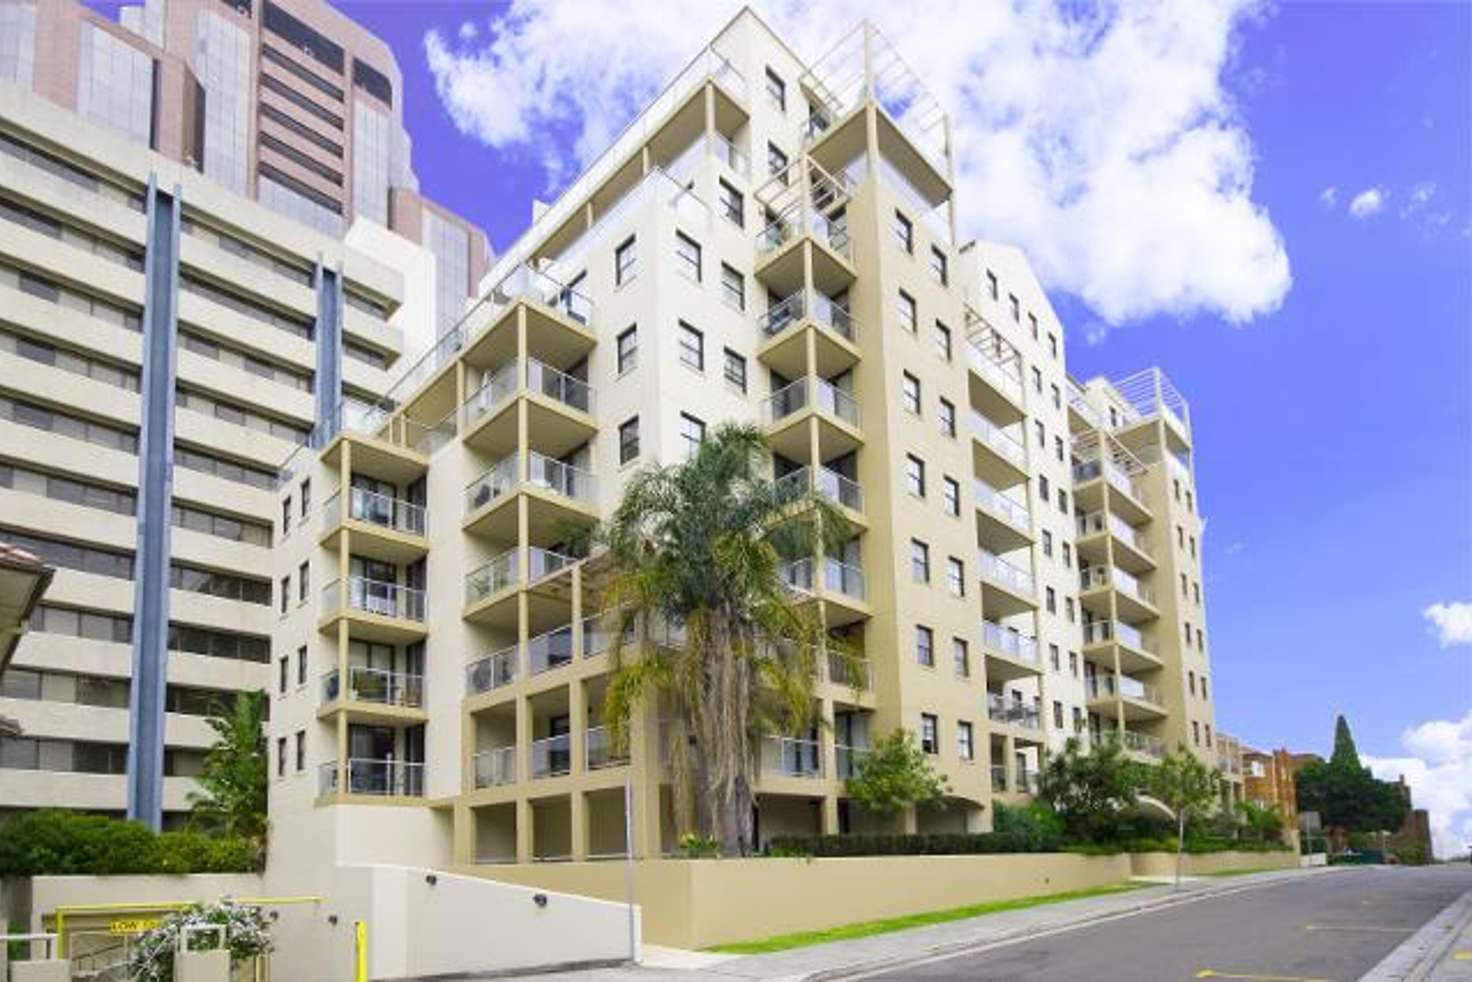 Main view of Homely studio listing, 401/9 William street, North Sydney NSW 2060